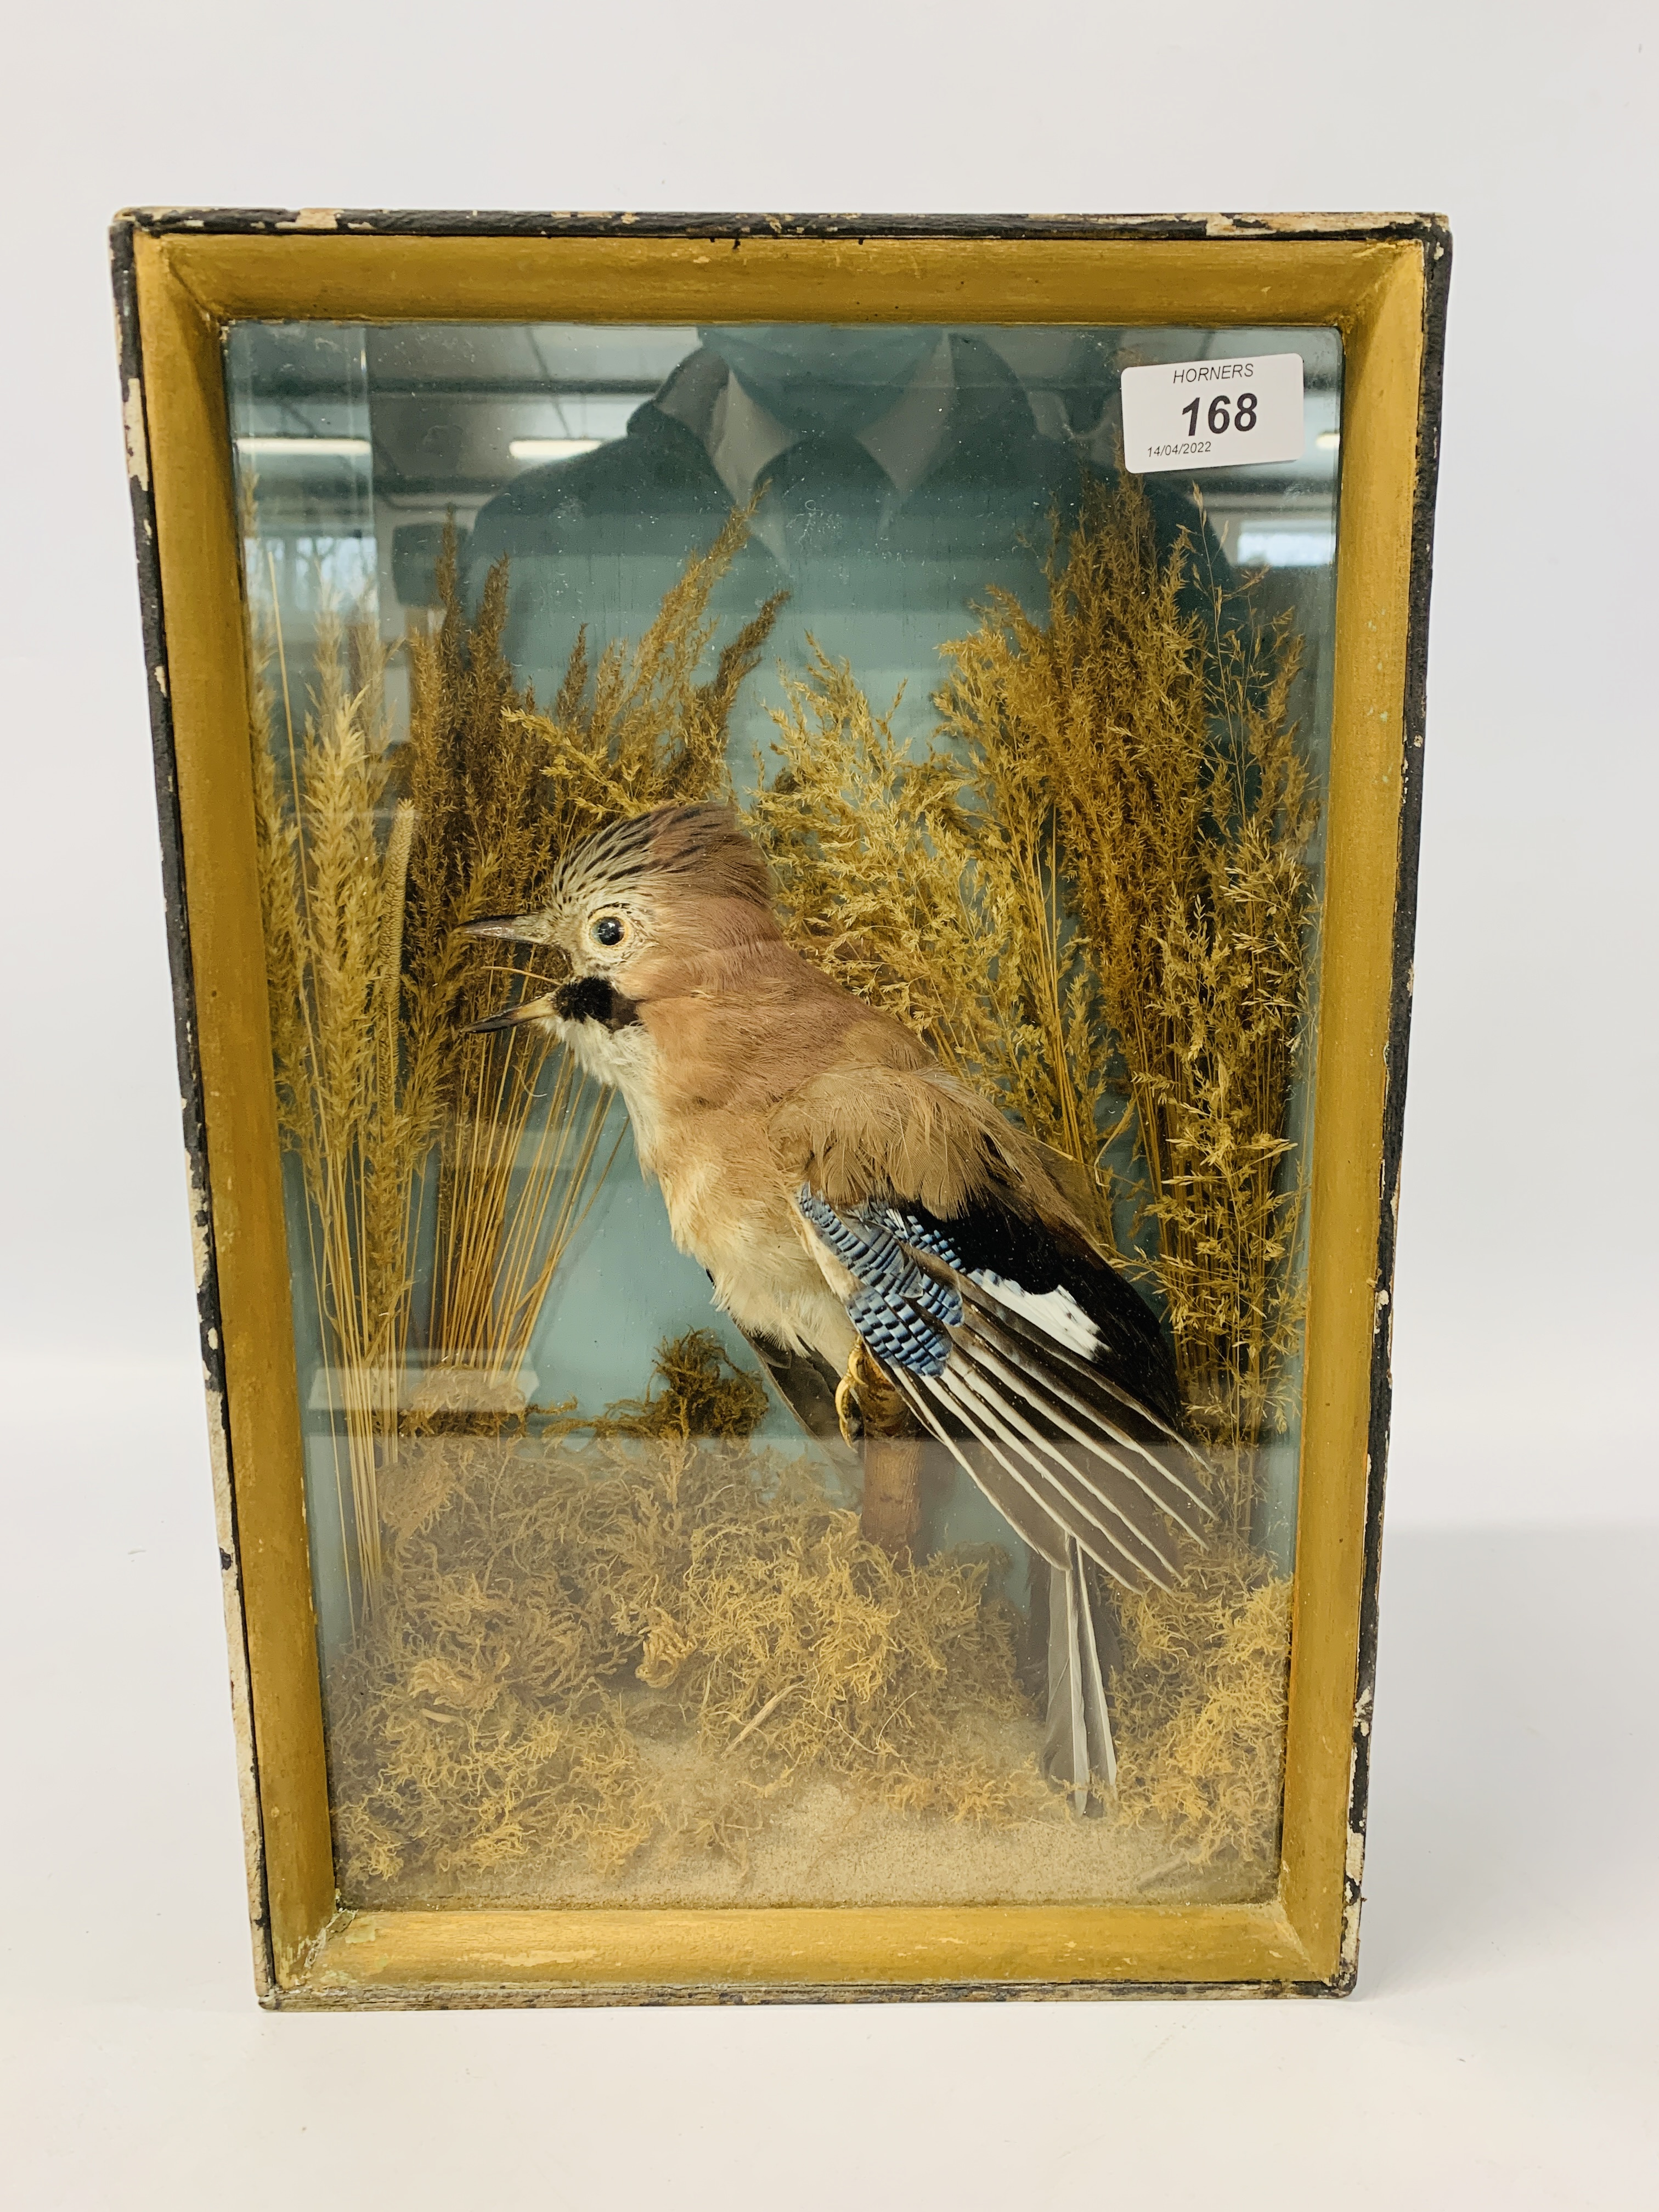 A CASED TAXIDERMY STUDY OF A "JAY" (CASE WIDTH 27CM. HEIGHT 40CM.